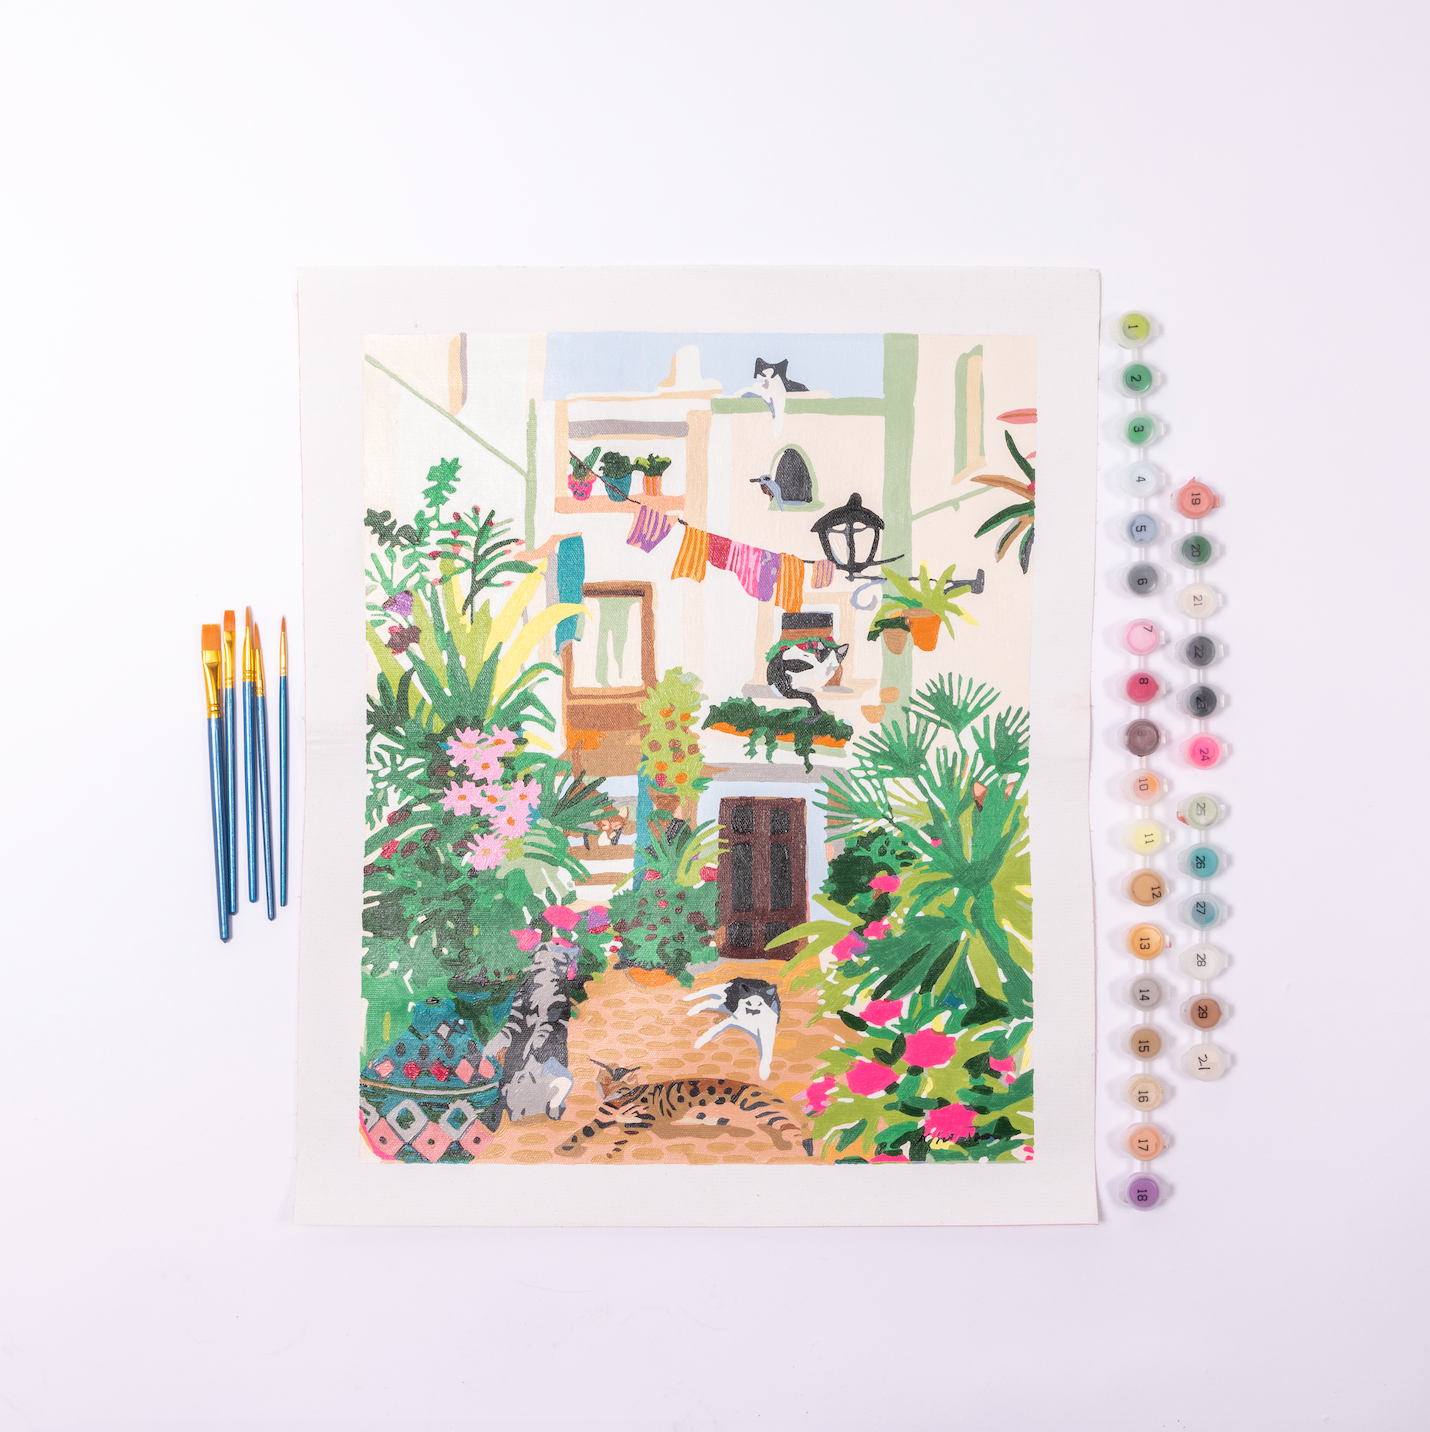 Portofino by Hebe Studio Paint by Numbers Deluxe